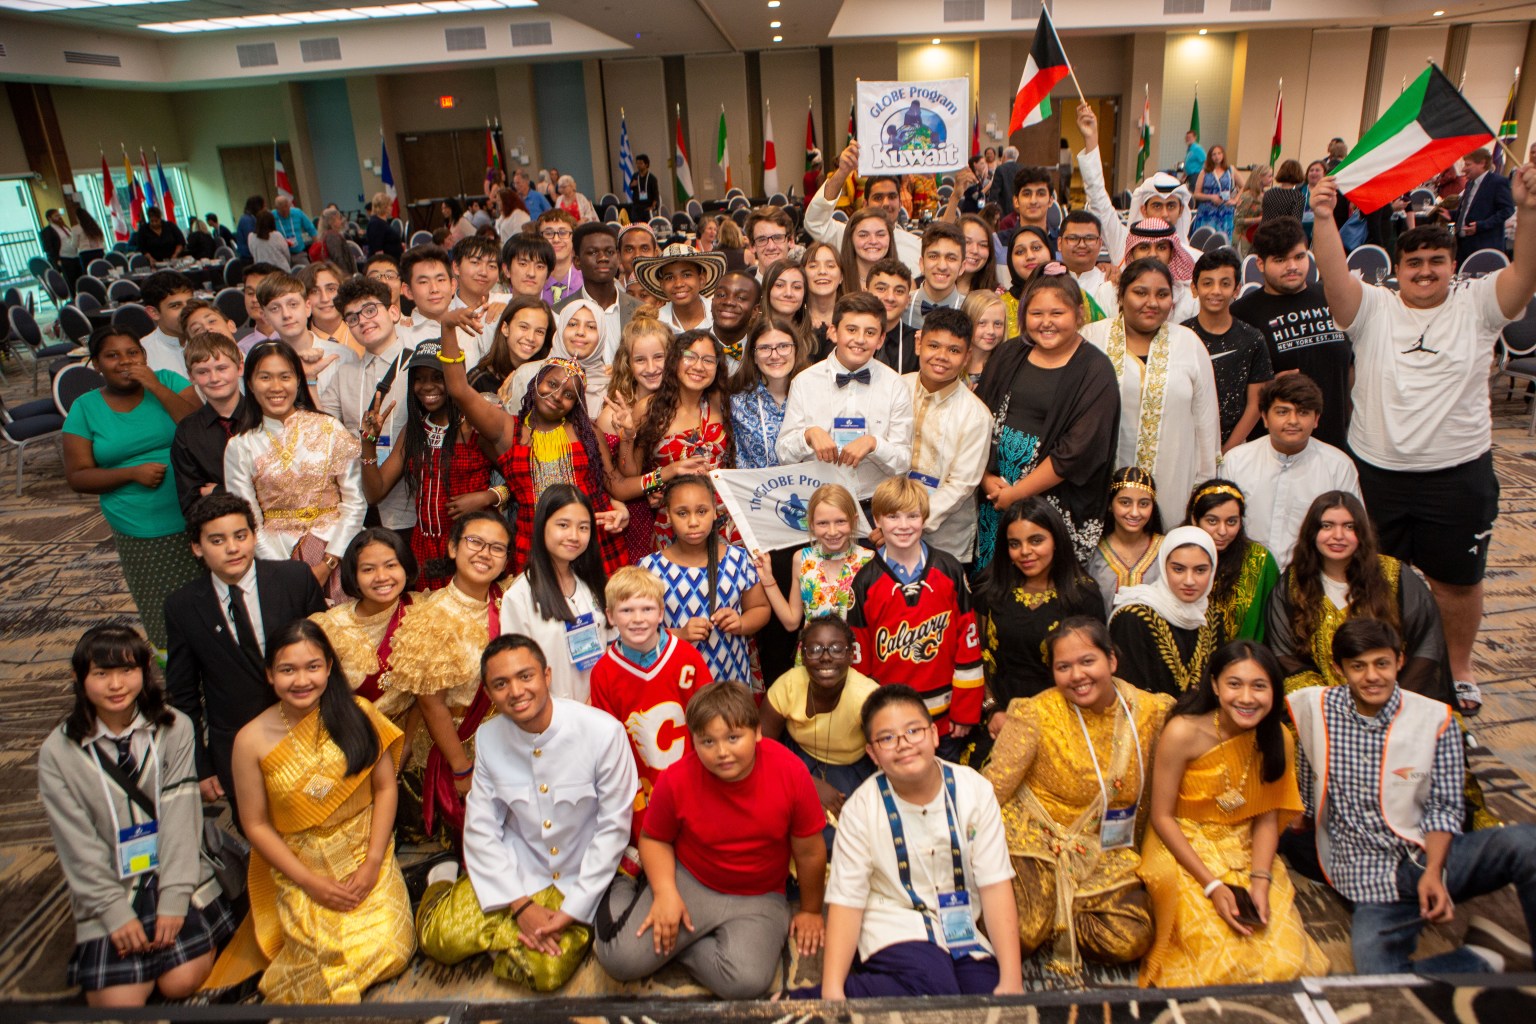 A photo of a large group of students, representing many different cultures, genders, and ages, posing and smiling in a large conference room. Many of the students wear traditional clothing from their cultures and hold national flags. The room has tan patterned carpet, and more national flags line the walls.